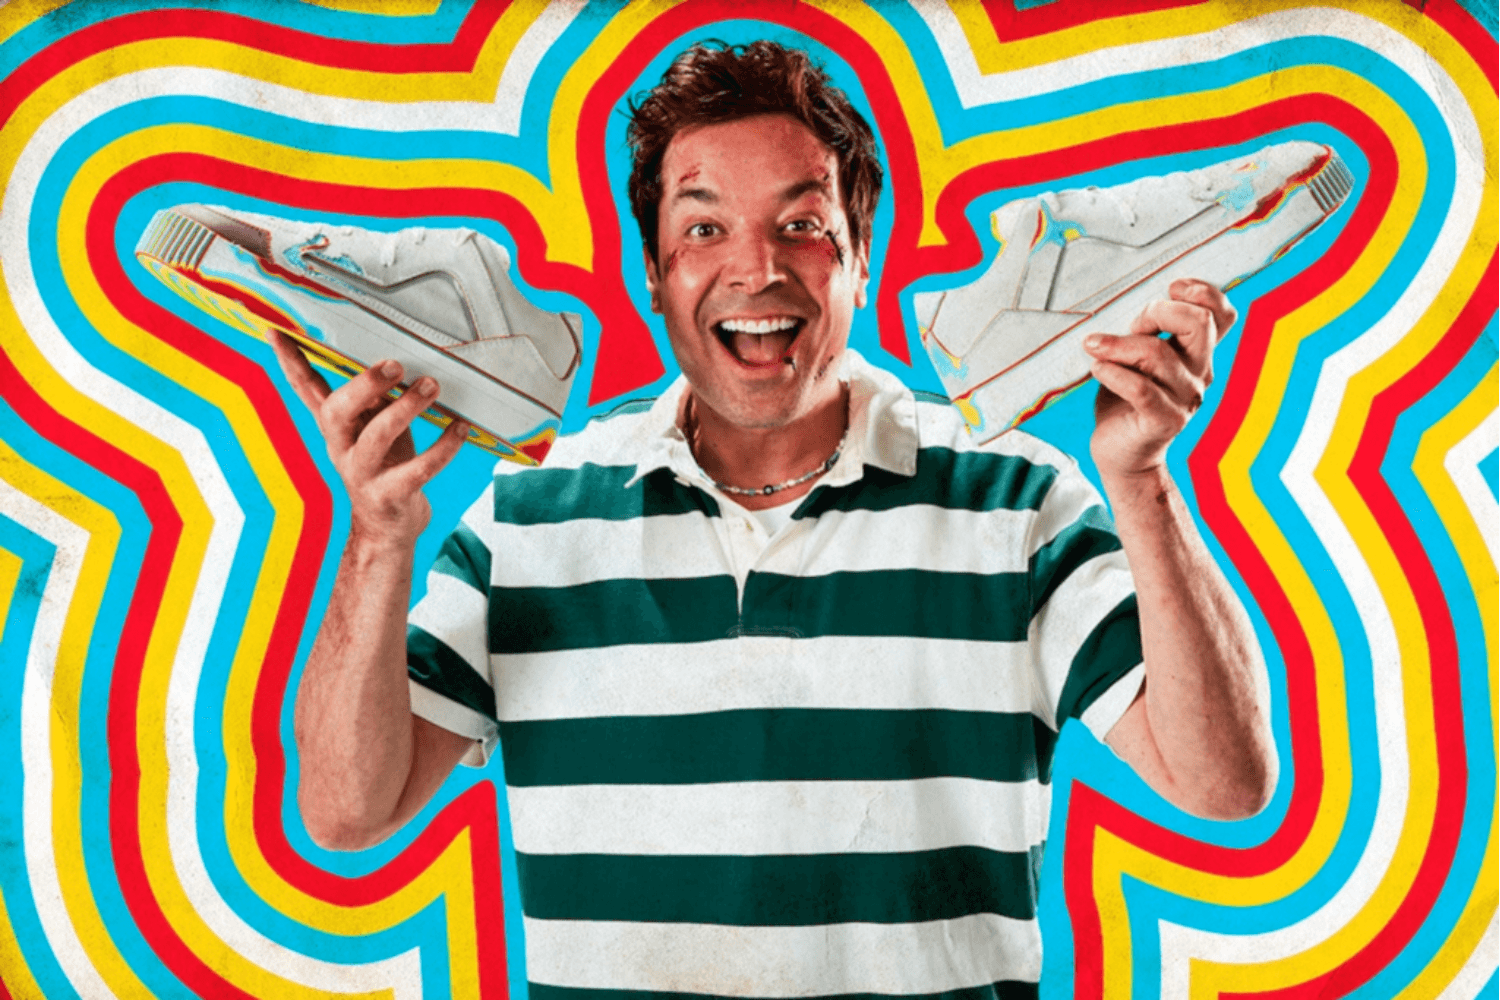 MSCHF releases the Gobstomper 'Jimmy Fallon Edition'